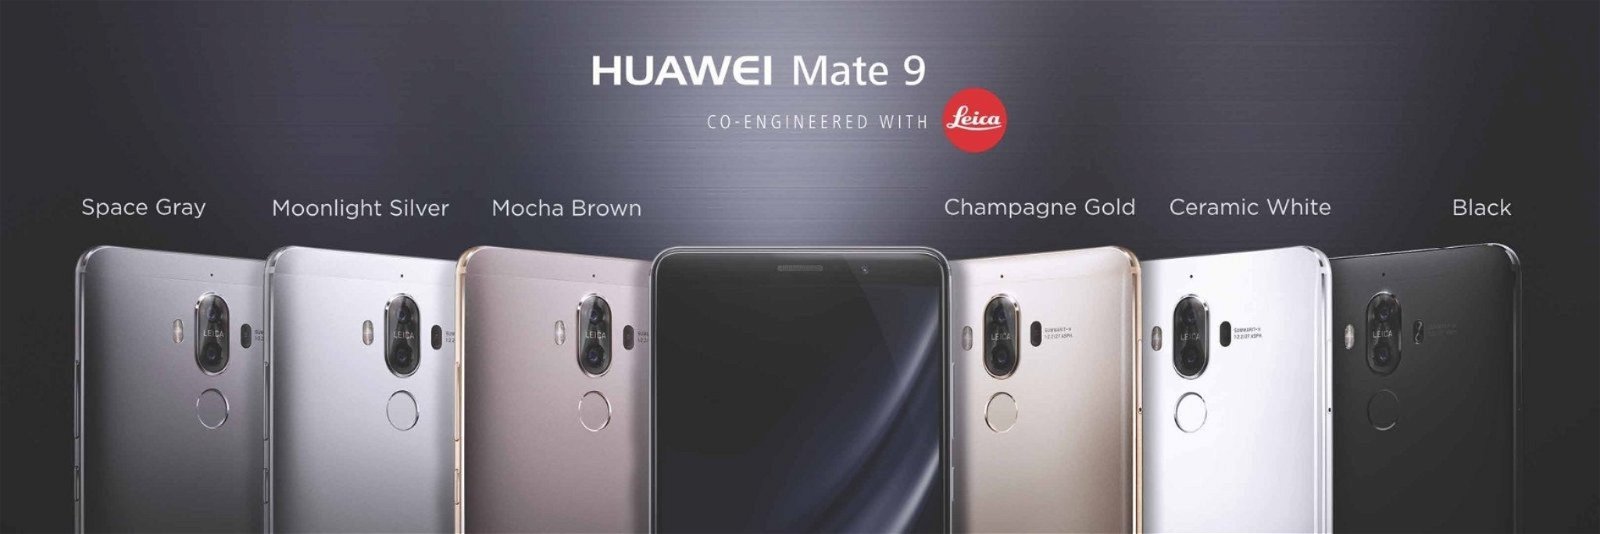 huawei-mate-9-colores